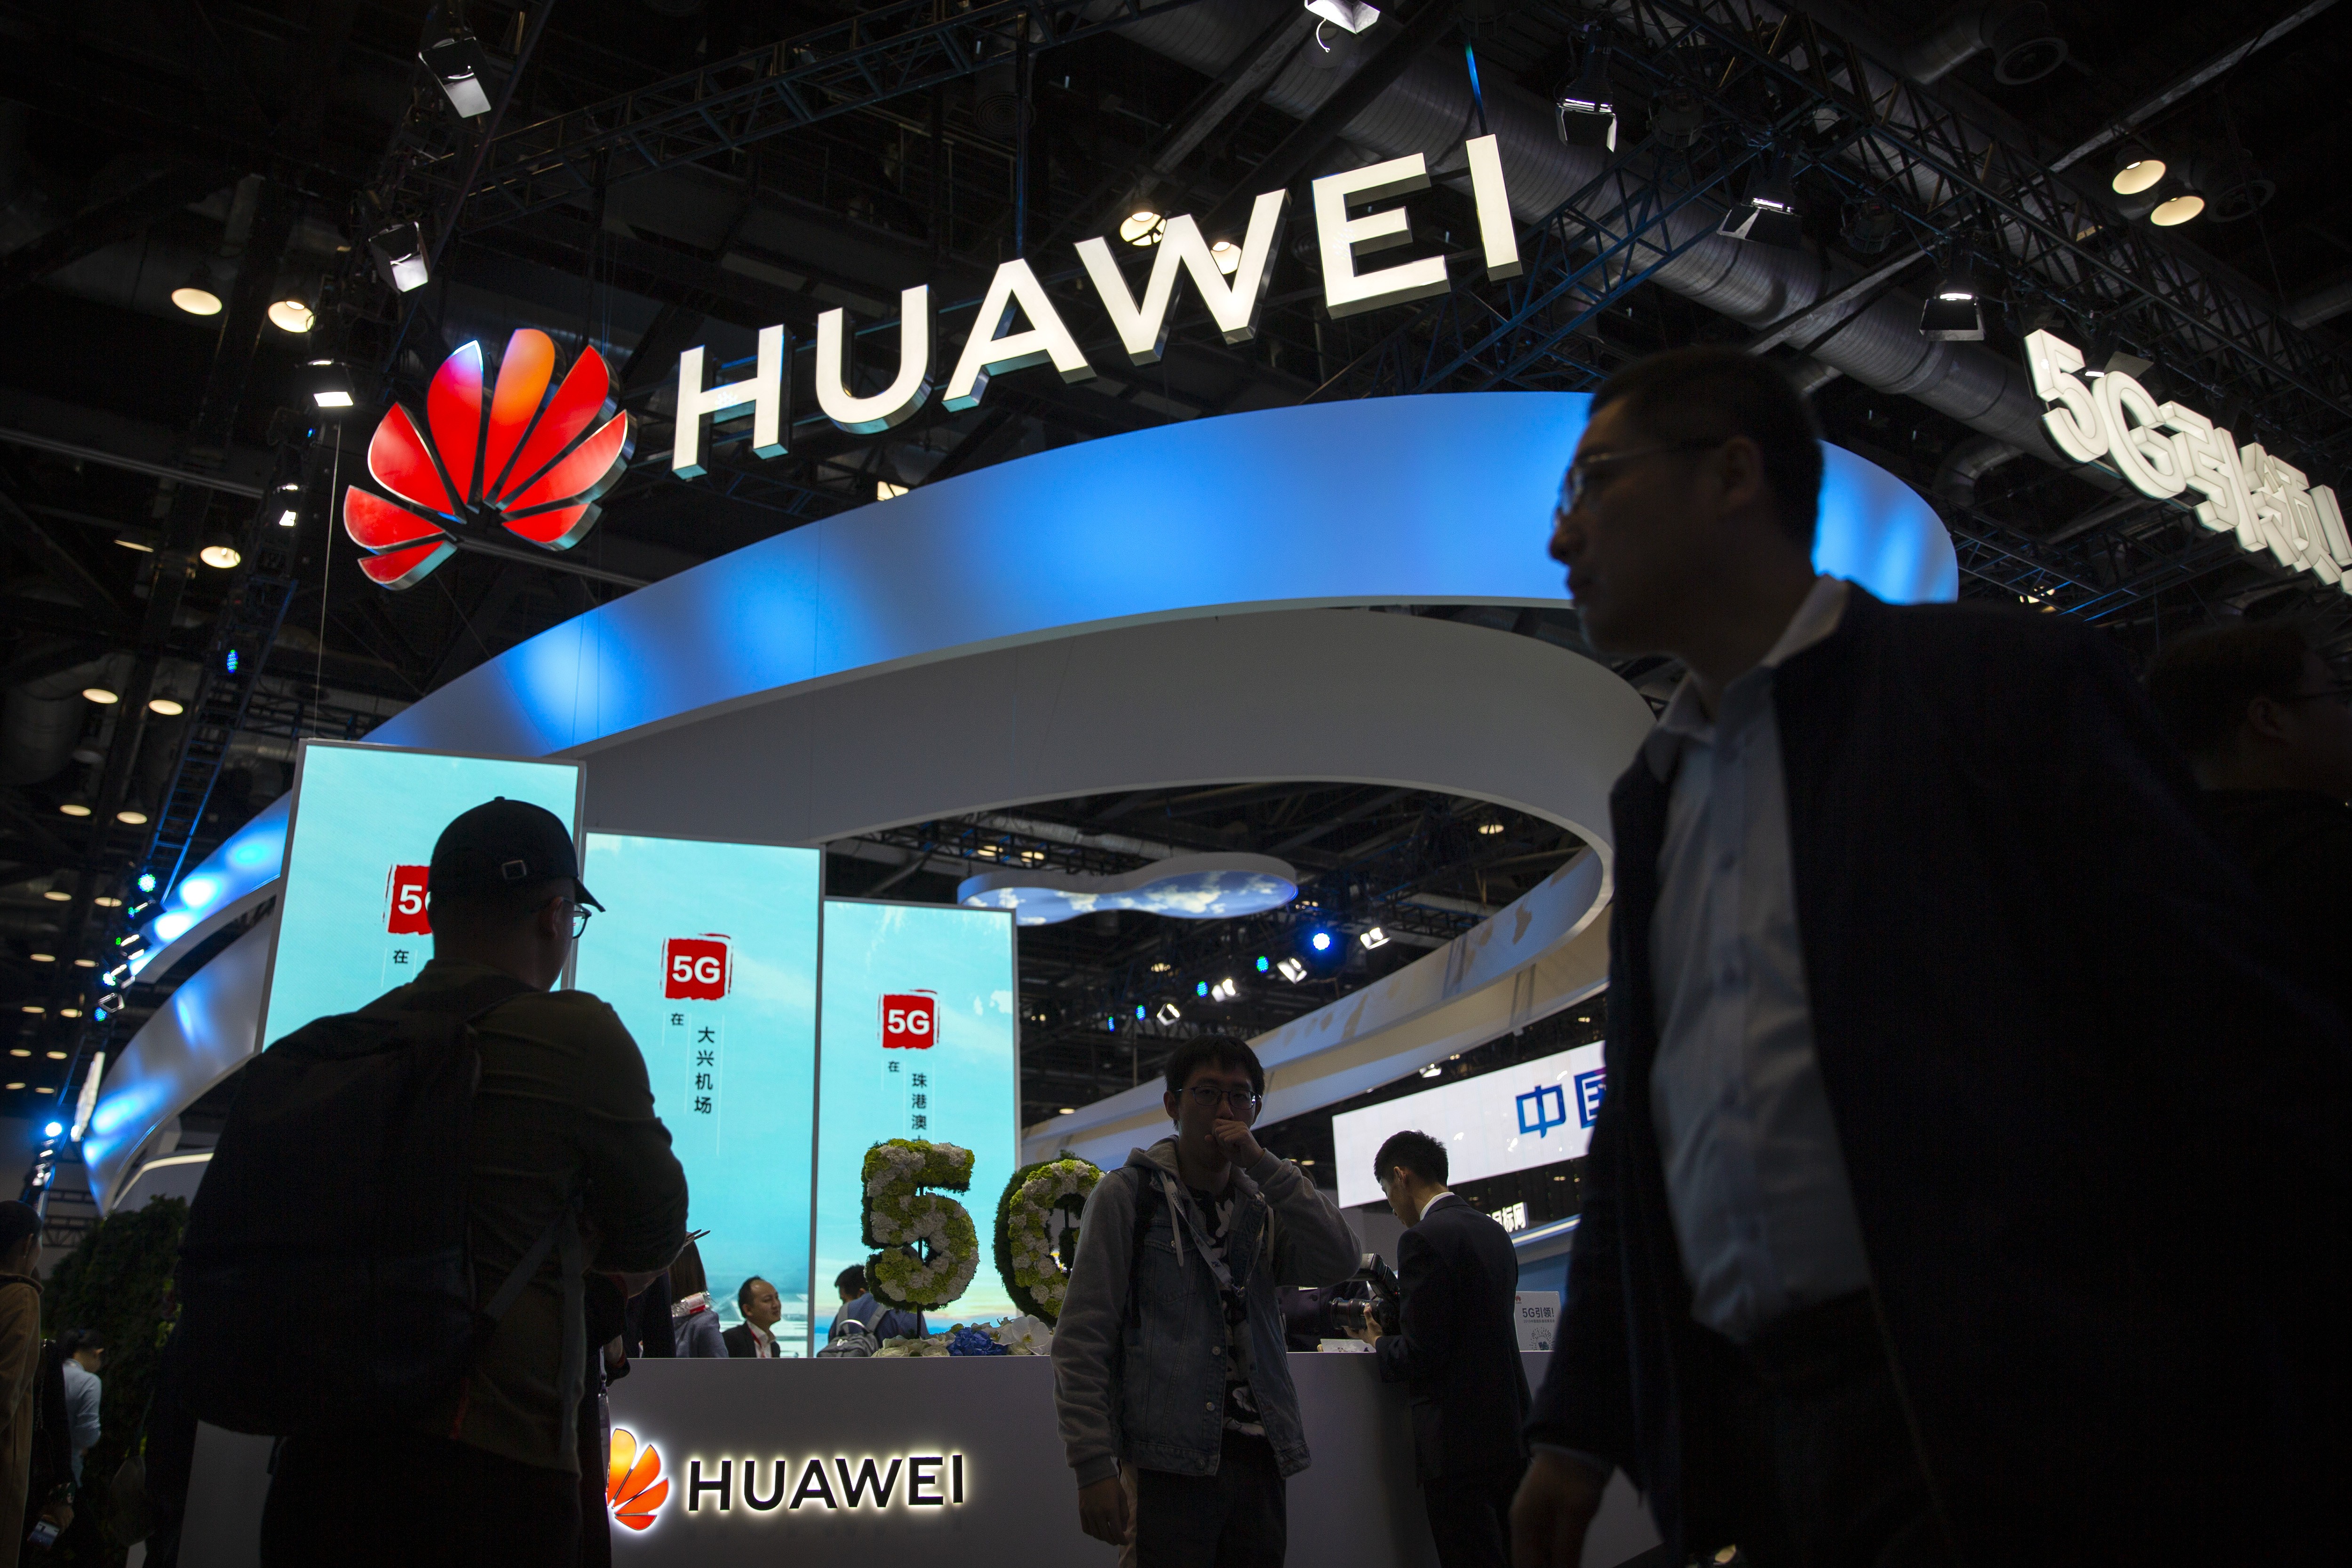 Attendees walk past the booth of Huawei Technologies at the PT Expo China trade show in Beijing on October 31. Photo: AP